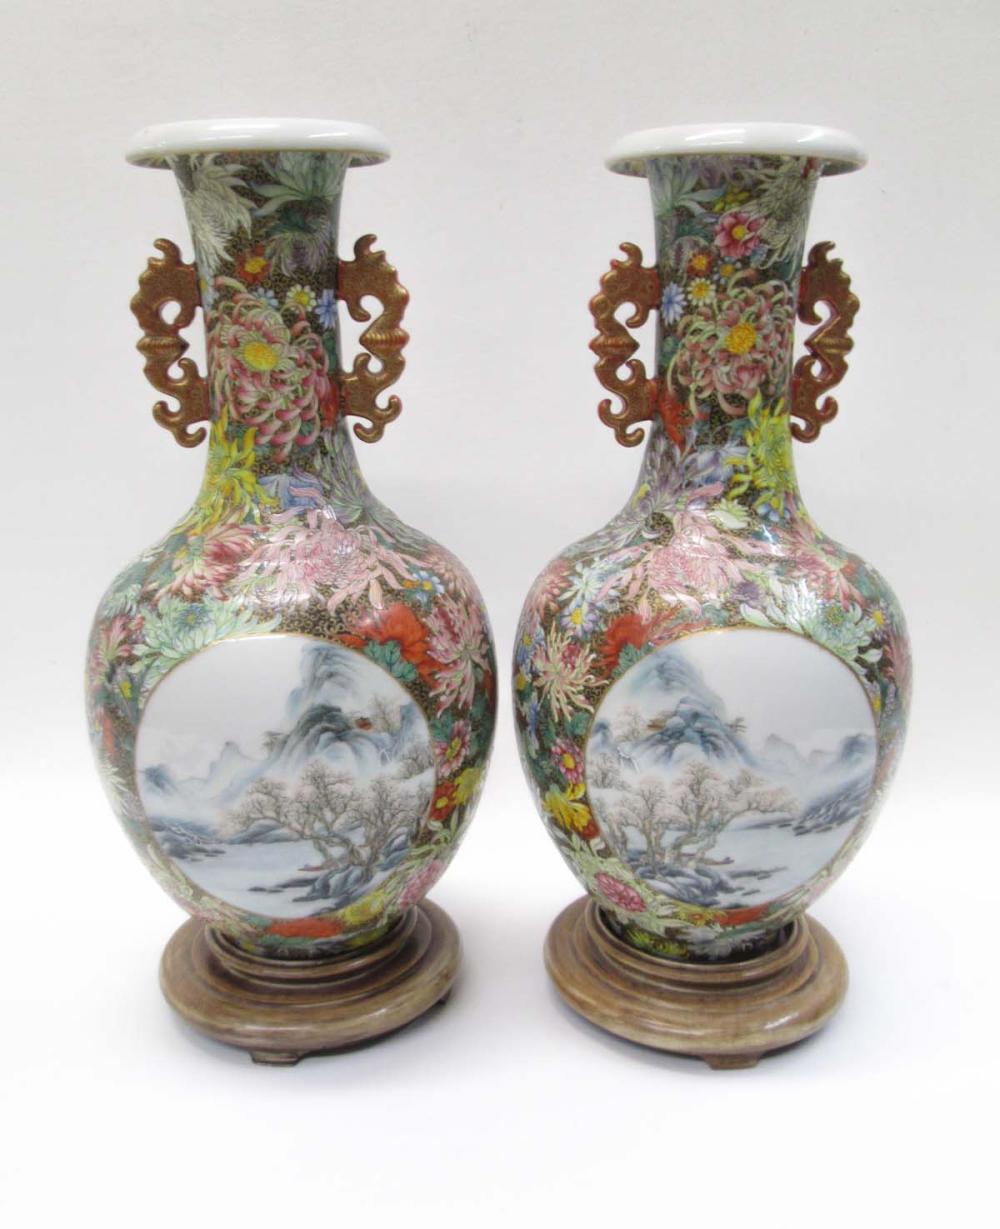 PAIR OF CHINESE PORCELAIN VASES  3166e4